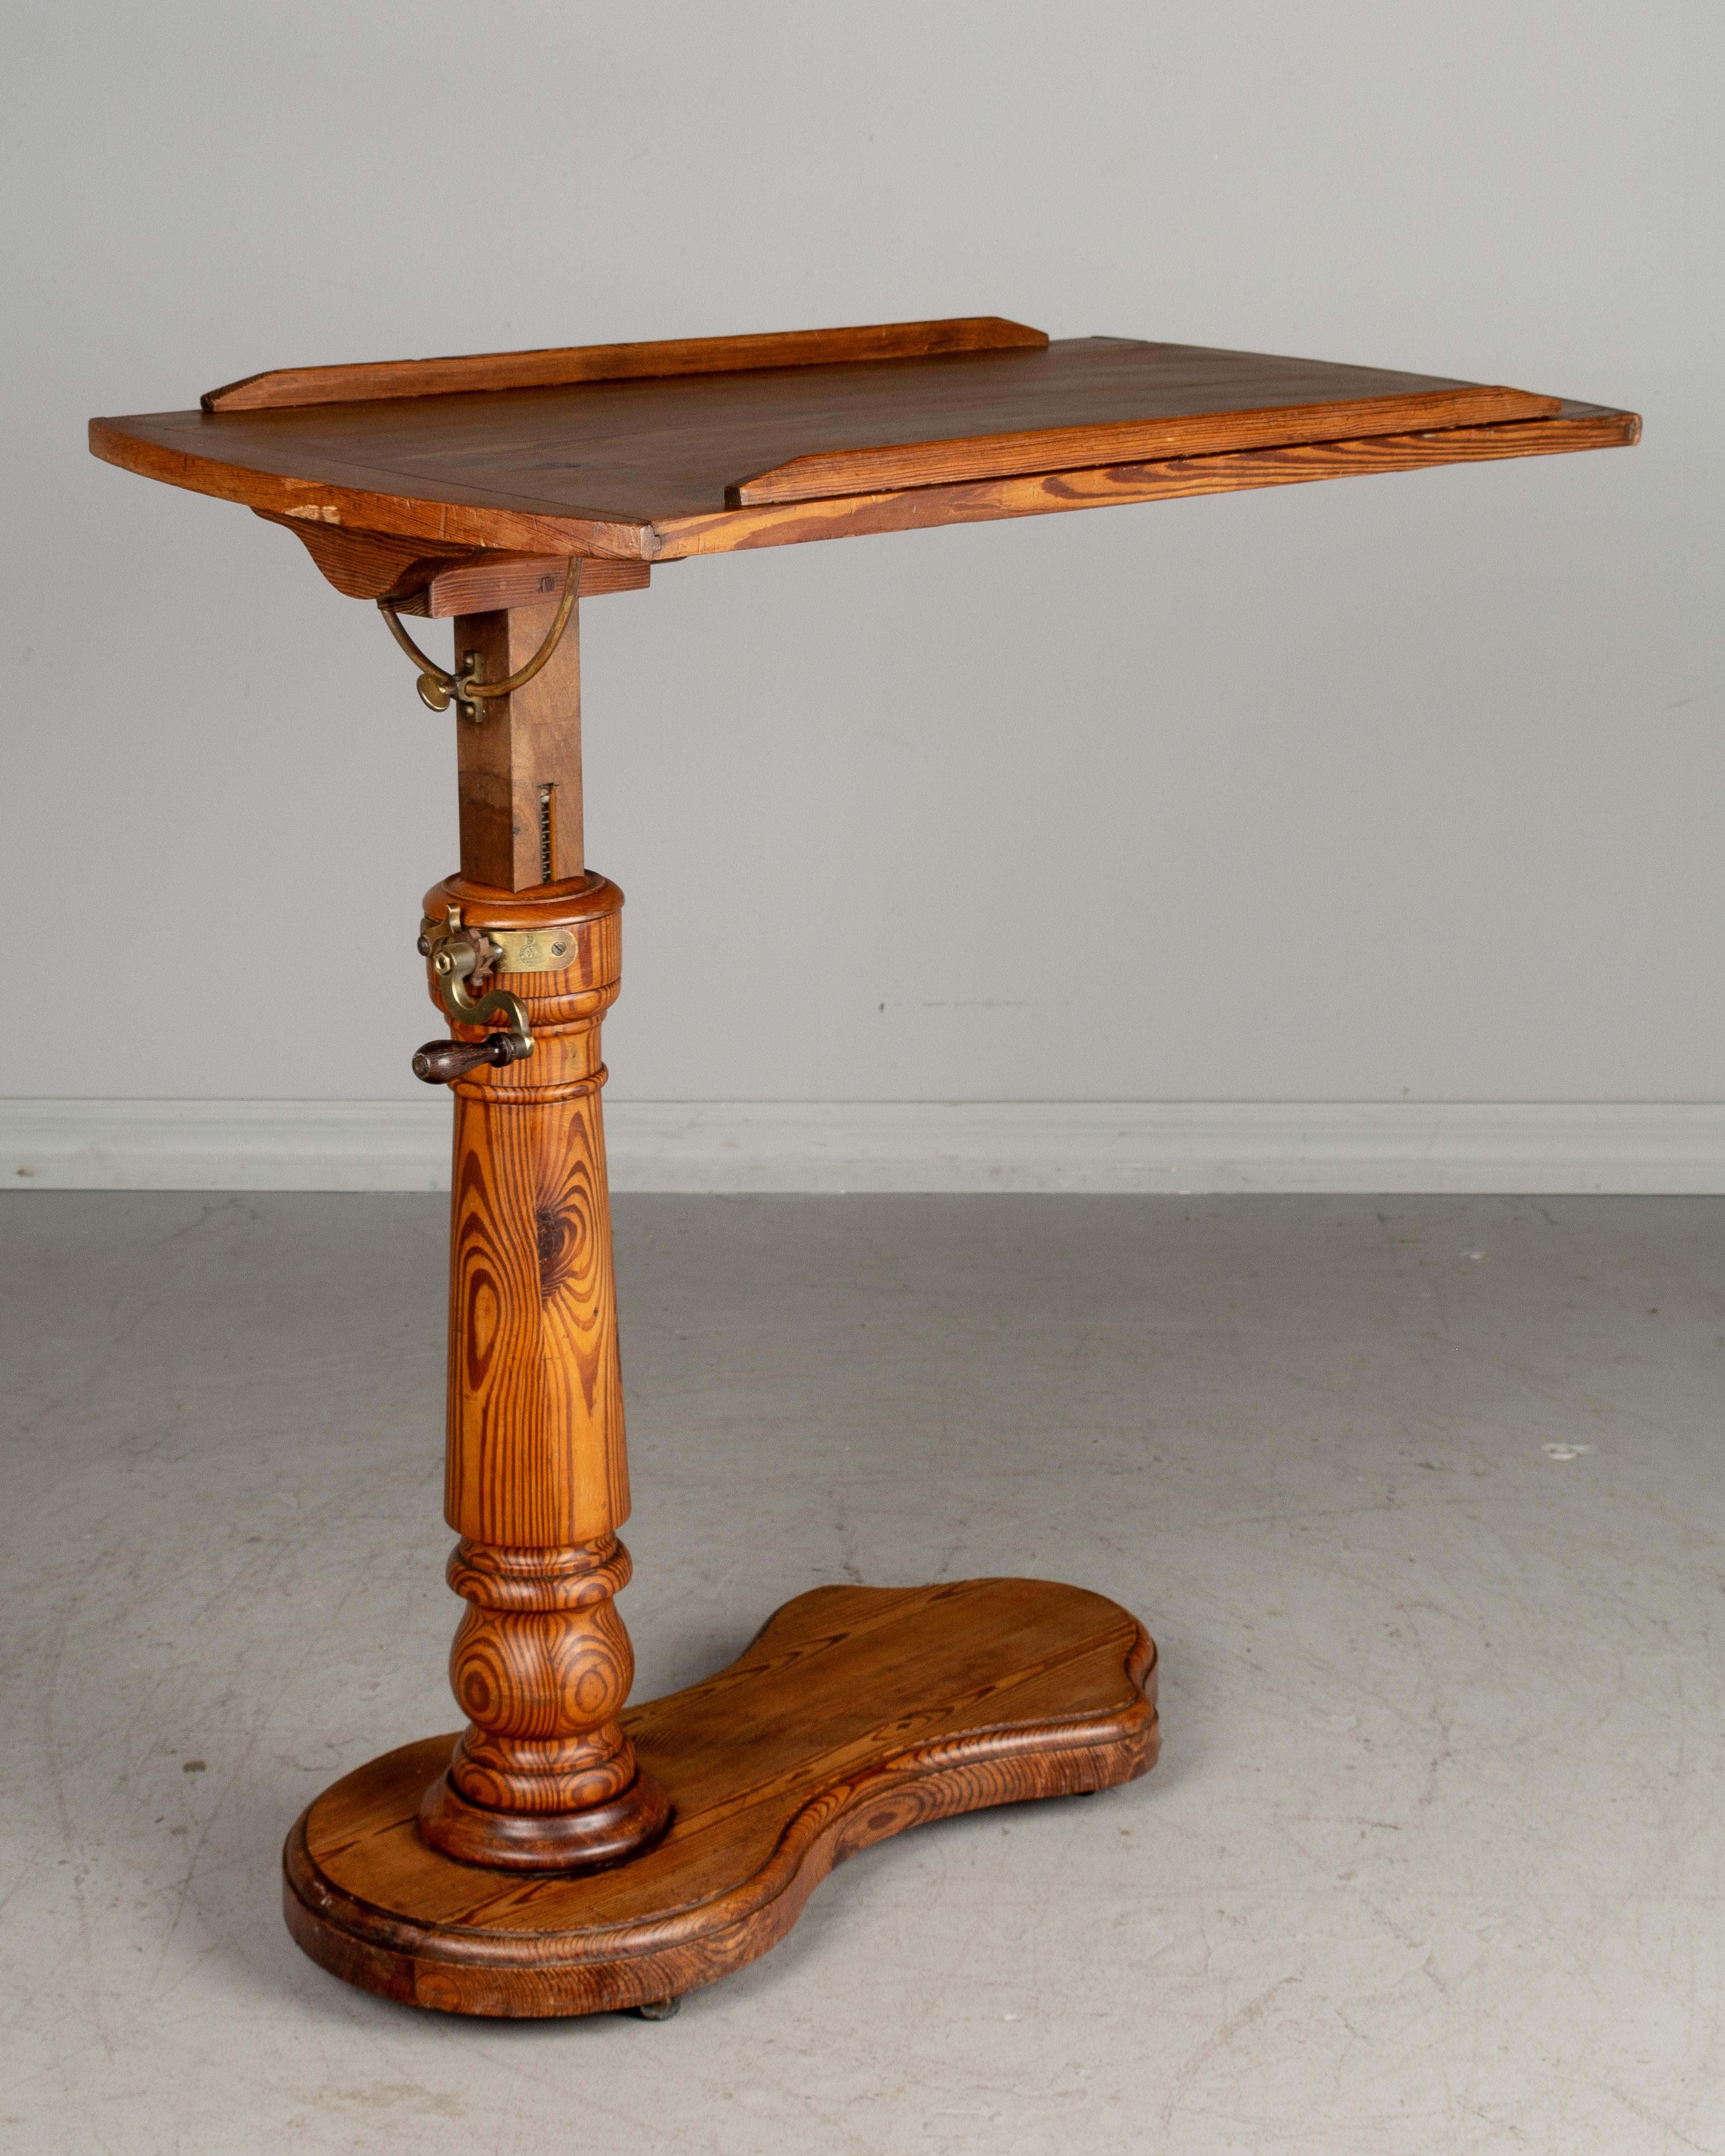 A 19th century French adjustable tilt-top tray table made of pitch pine with turned post and cast brass hardware. May be tilted flat or angled and is raised or lowered using a hand crank to a height of 32” to 45”. The base has wheels that roll